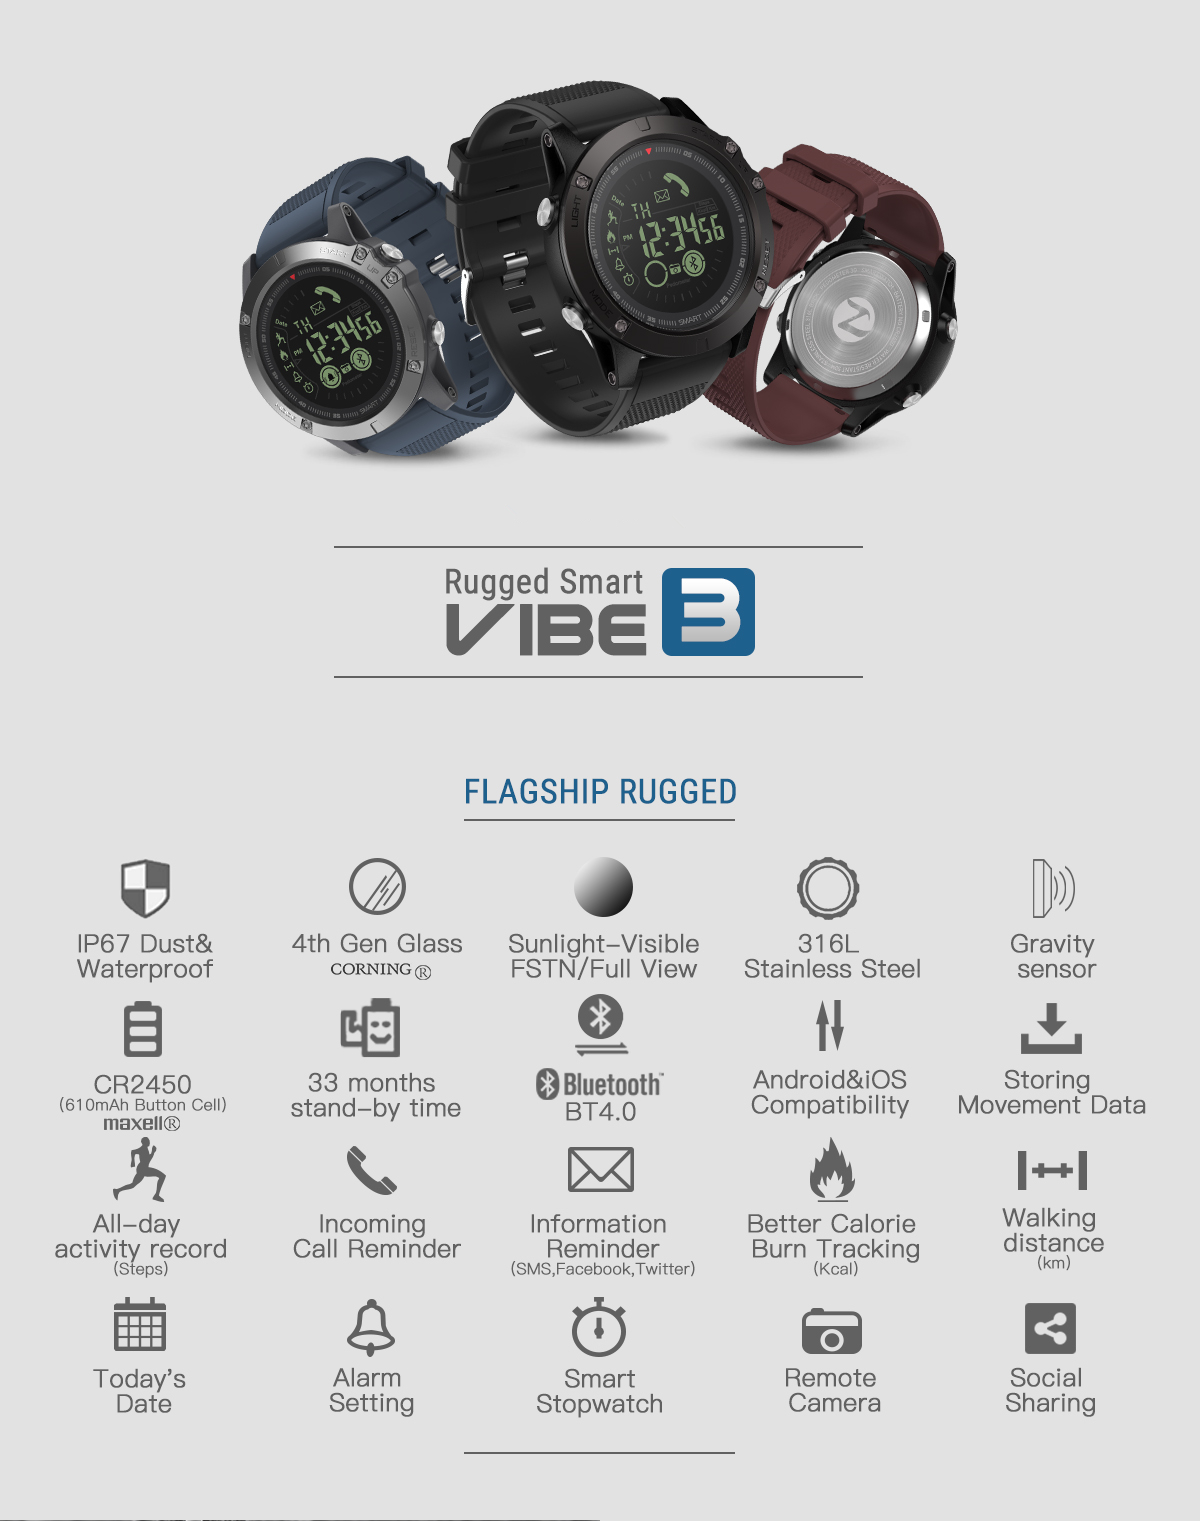 Zeblaze VIBE 3 Flagship Rugged All-day Activity Record Sport 33 Month Long Standby Smart Watch 11